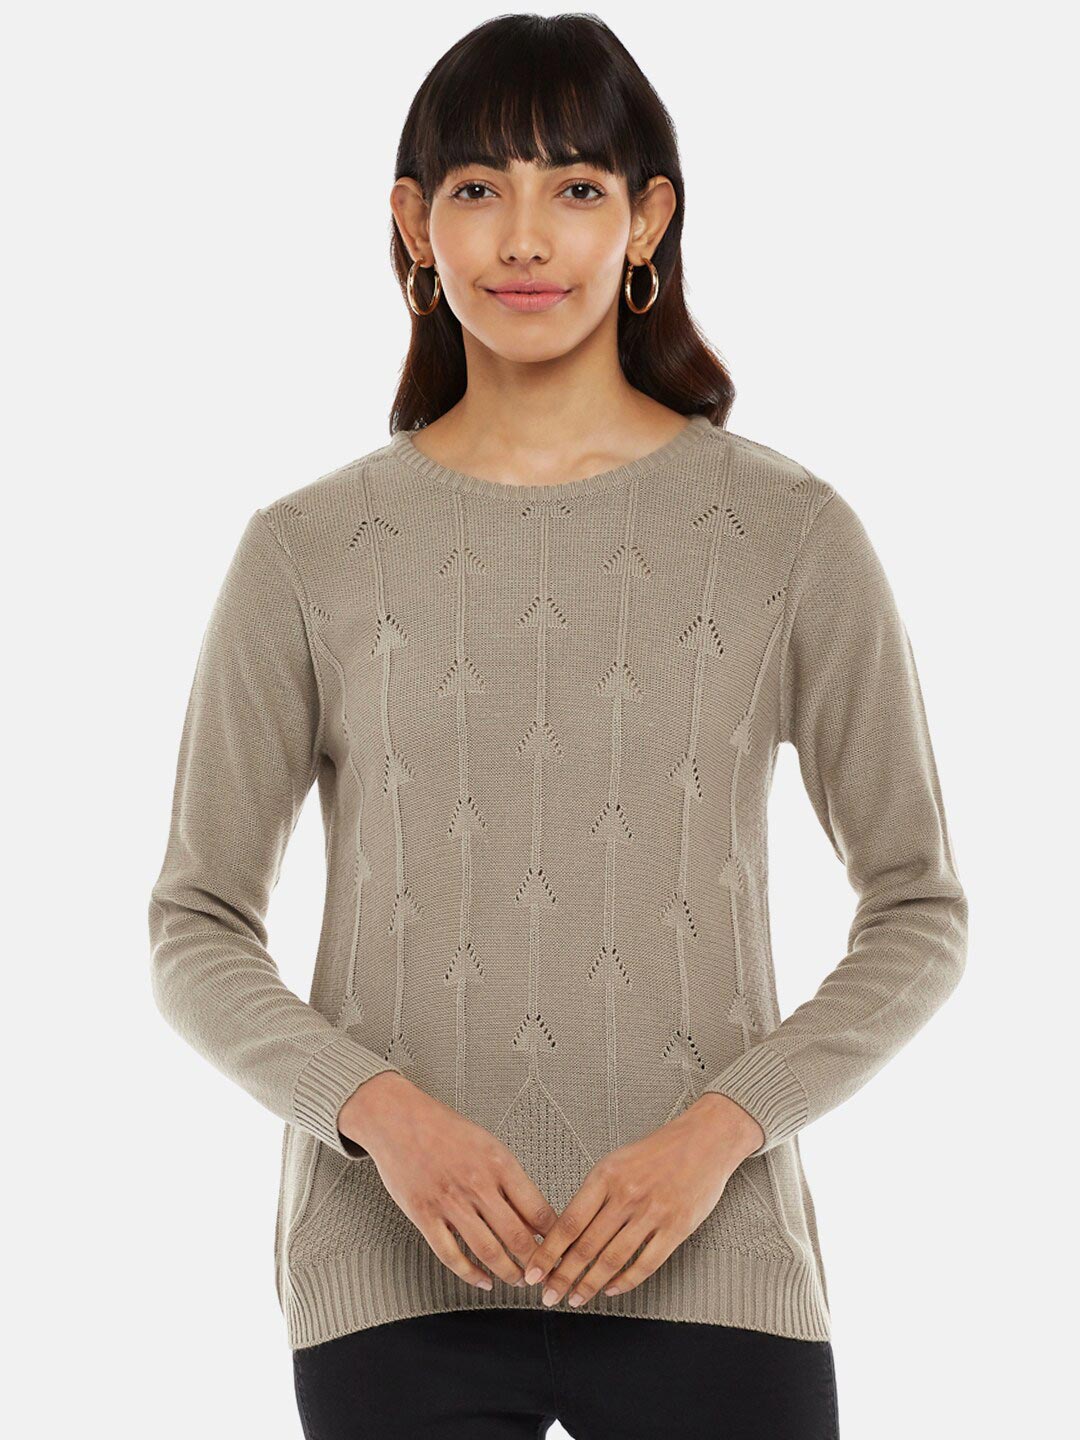 Honey by Pantaloons Women Beige Self Design Pullover Sweater Price in India